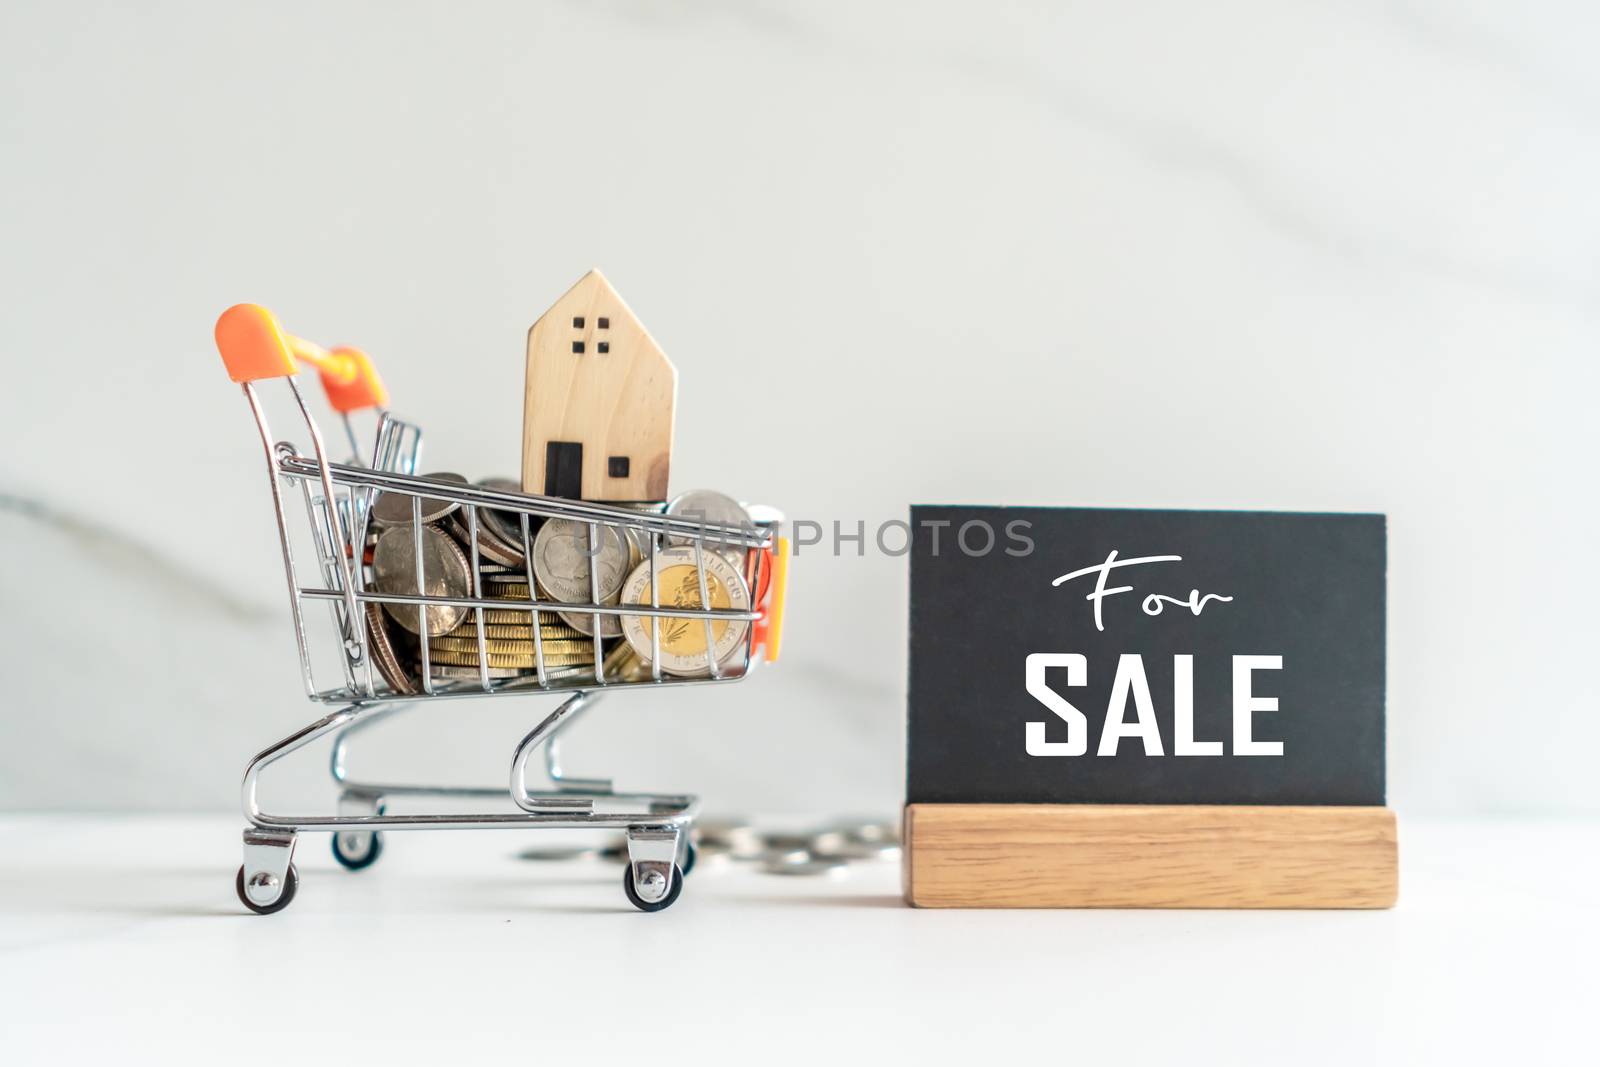 Home model in mini cart model full of coins money with for sale text on blank black wooden sign. by Suwant